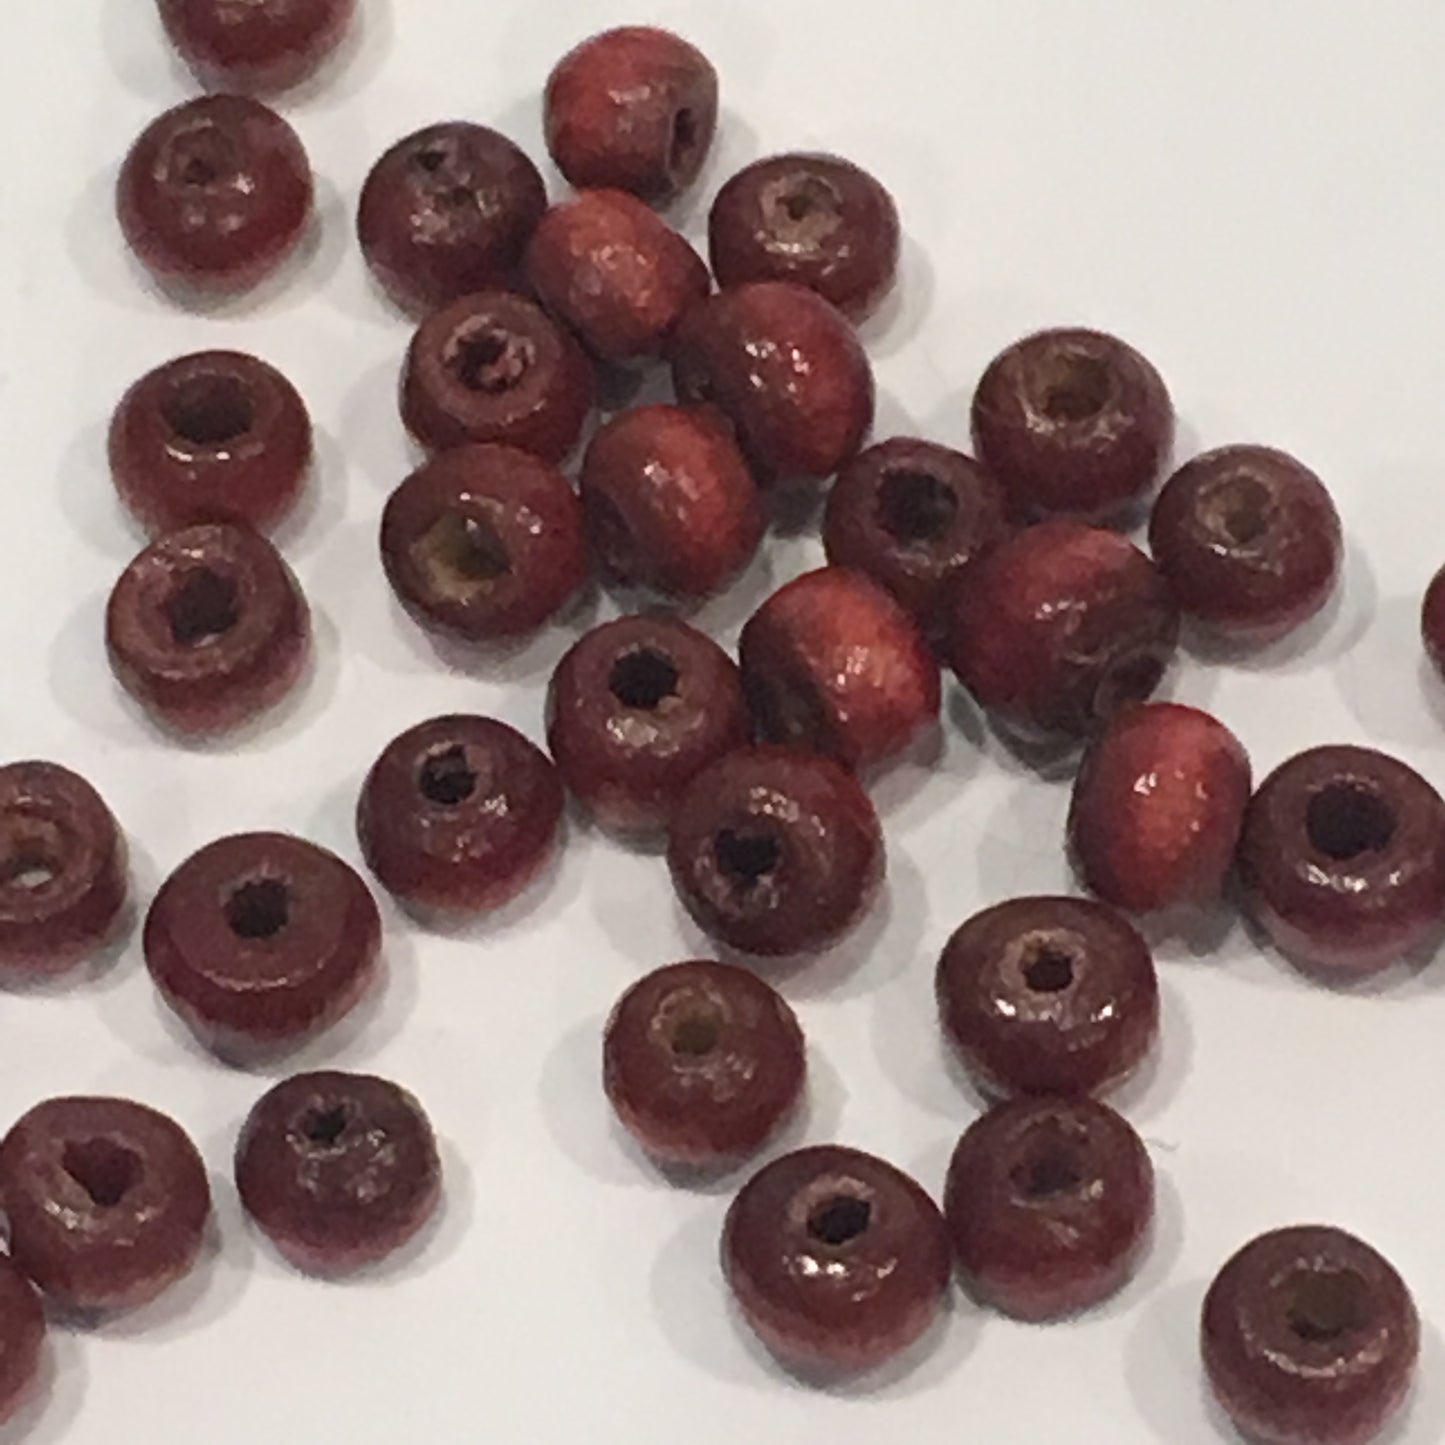 Red Painted Wooden Beads 3-4 mm, 38 Beads